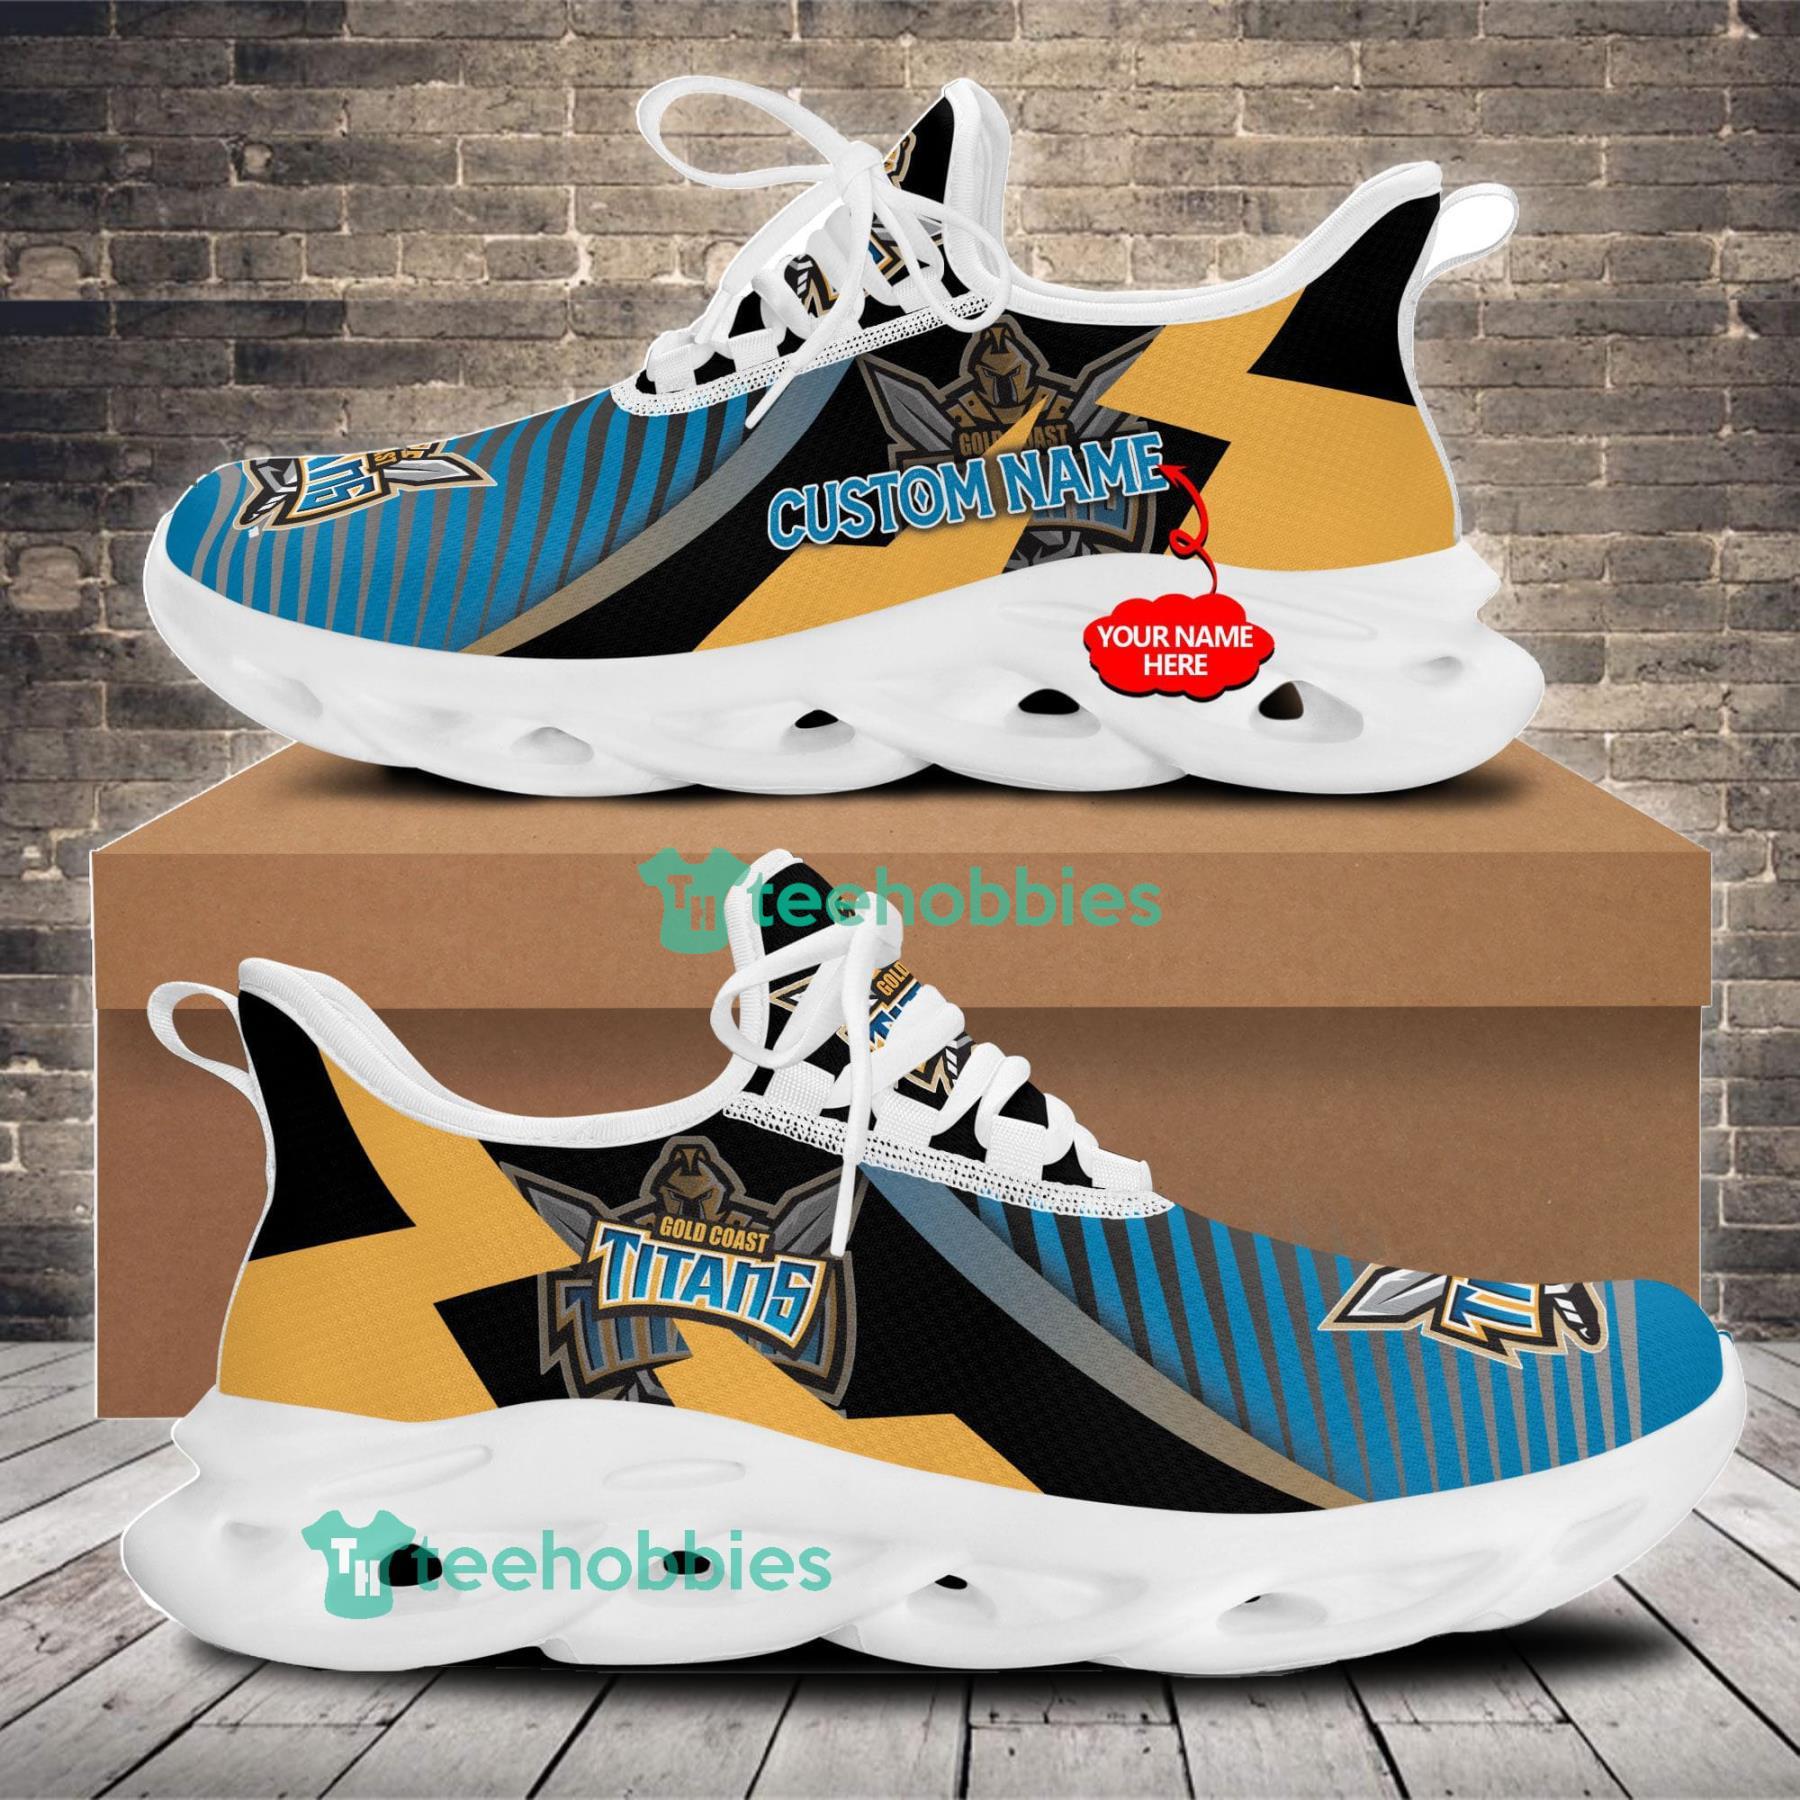 Gold Coast Titans Sport Team Personalized Name Sneakers Max Soul Shoes For Men And Women Product Photo 1